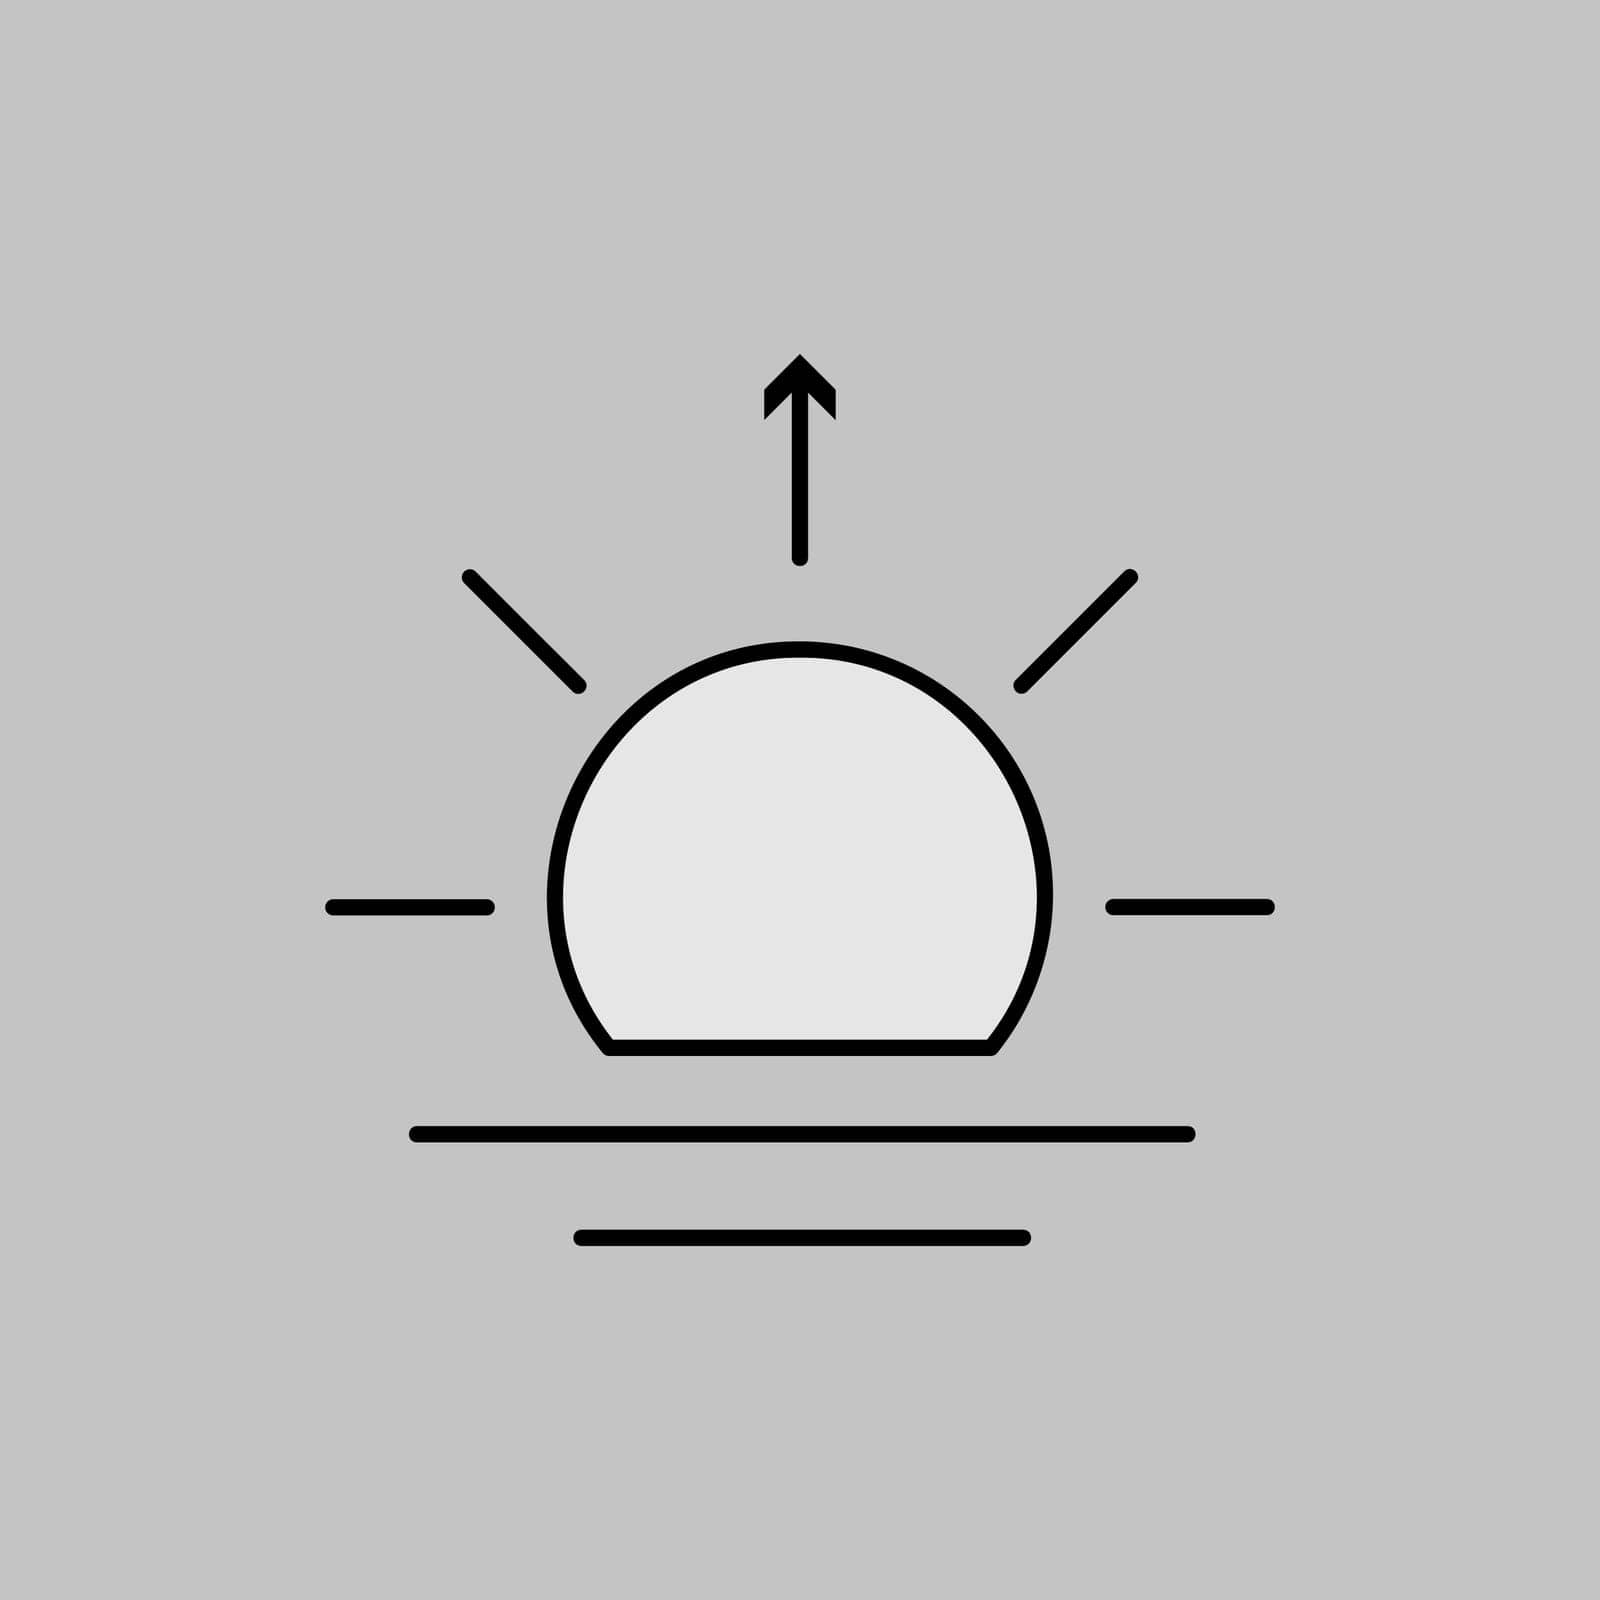 Sunrise vector grayscale icon. Meteorology sign. Graph symbol for travel, tourism and weather web site and apps design, logo, app, UI